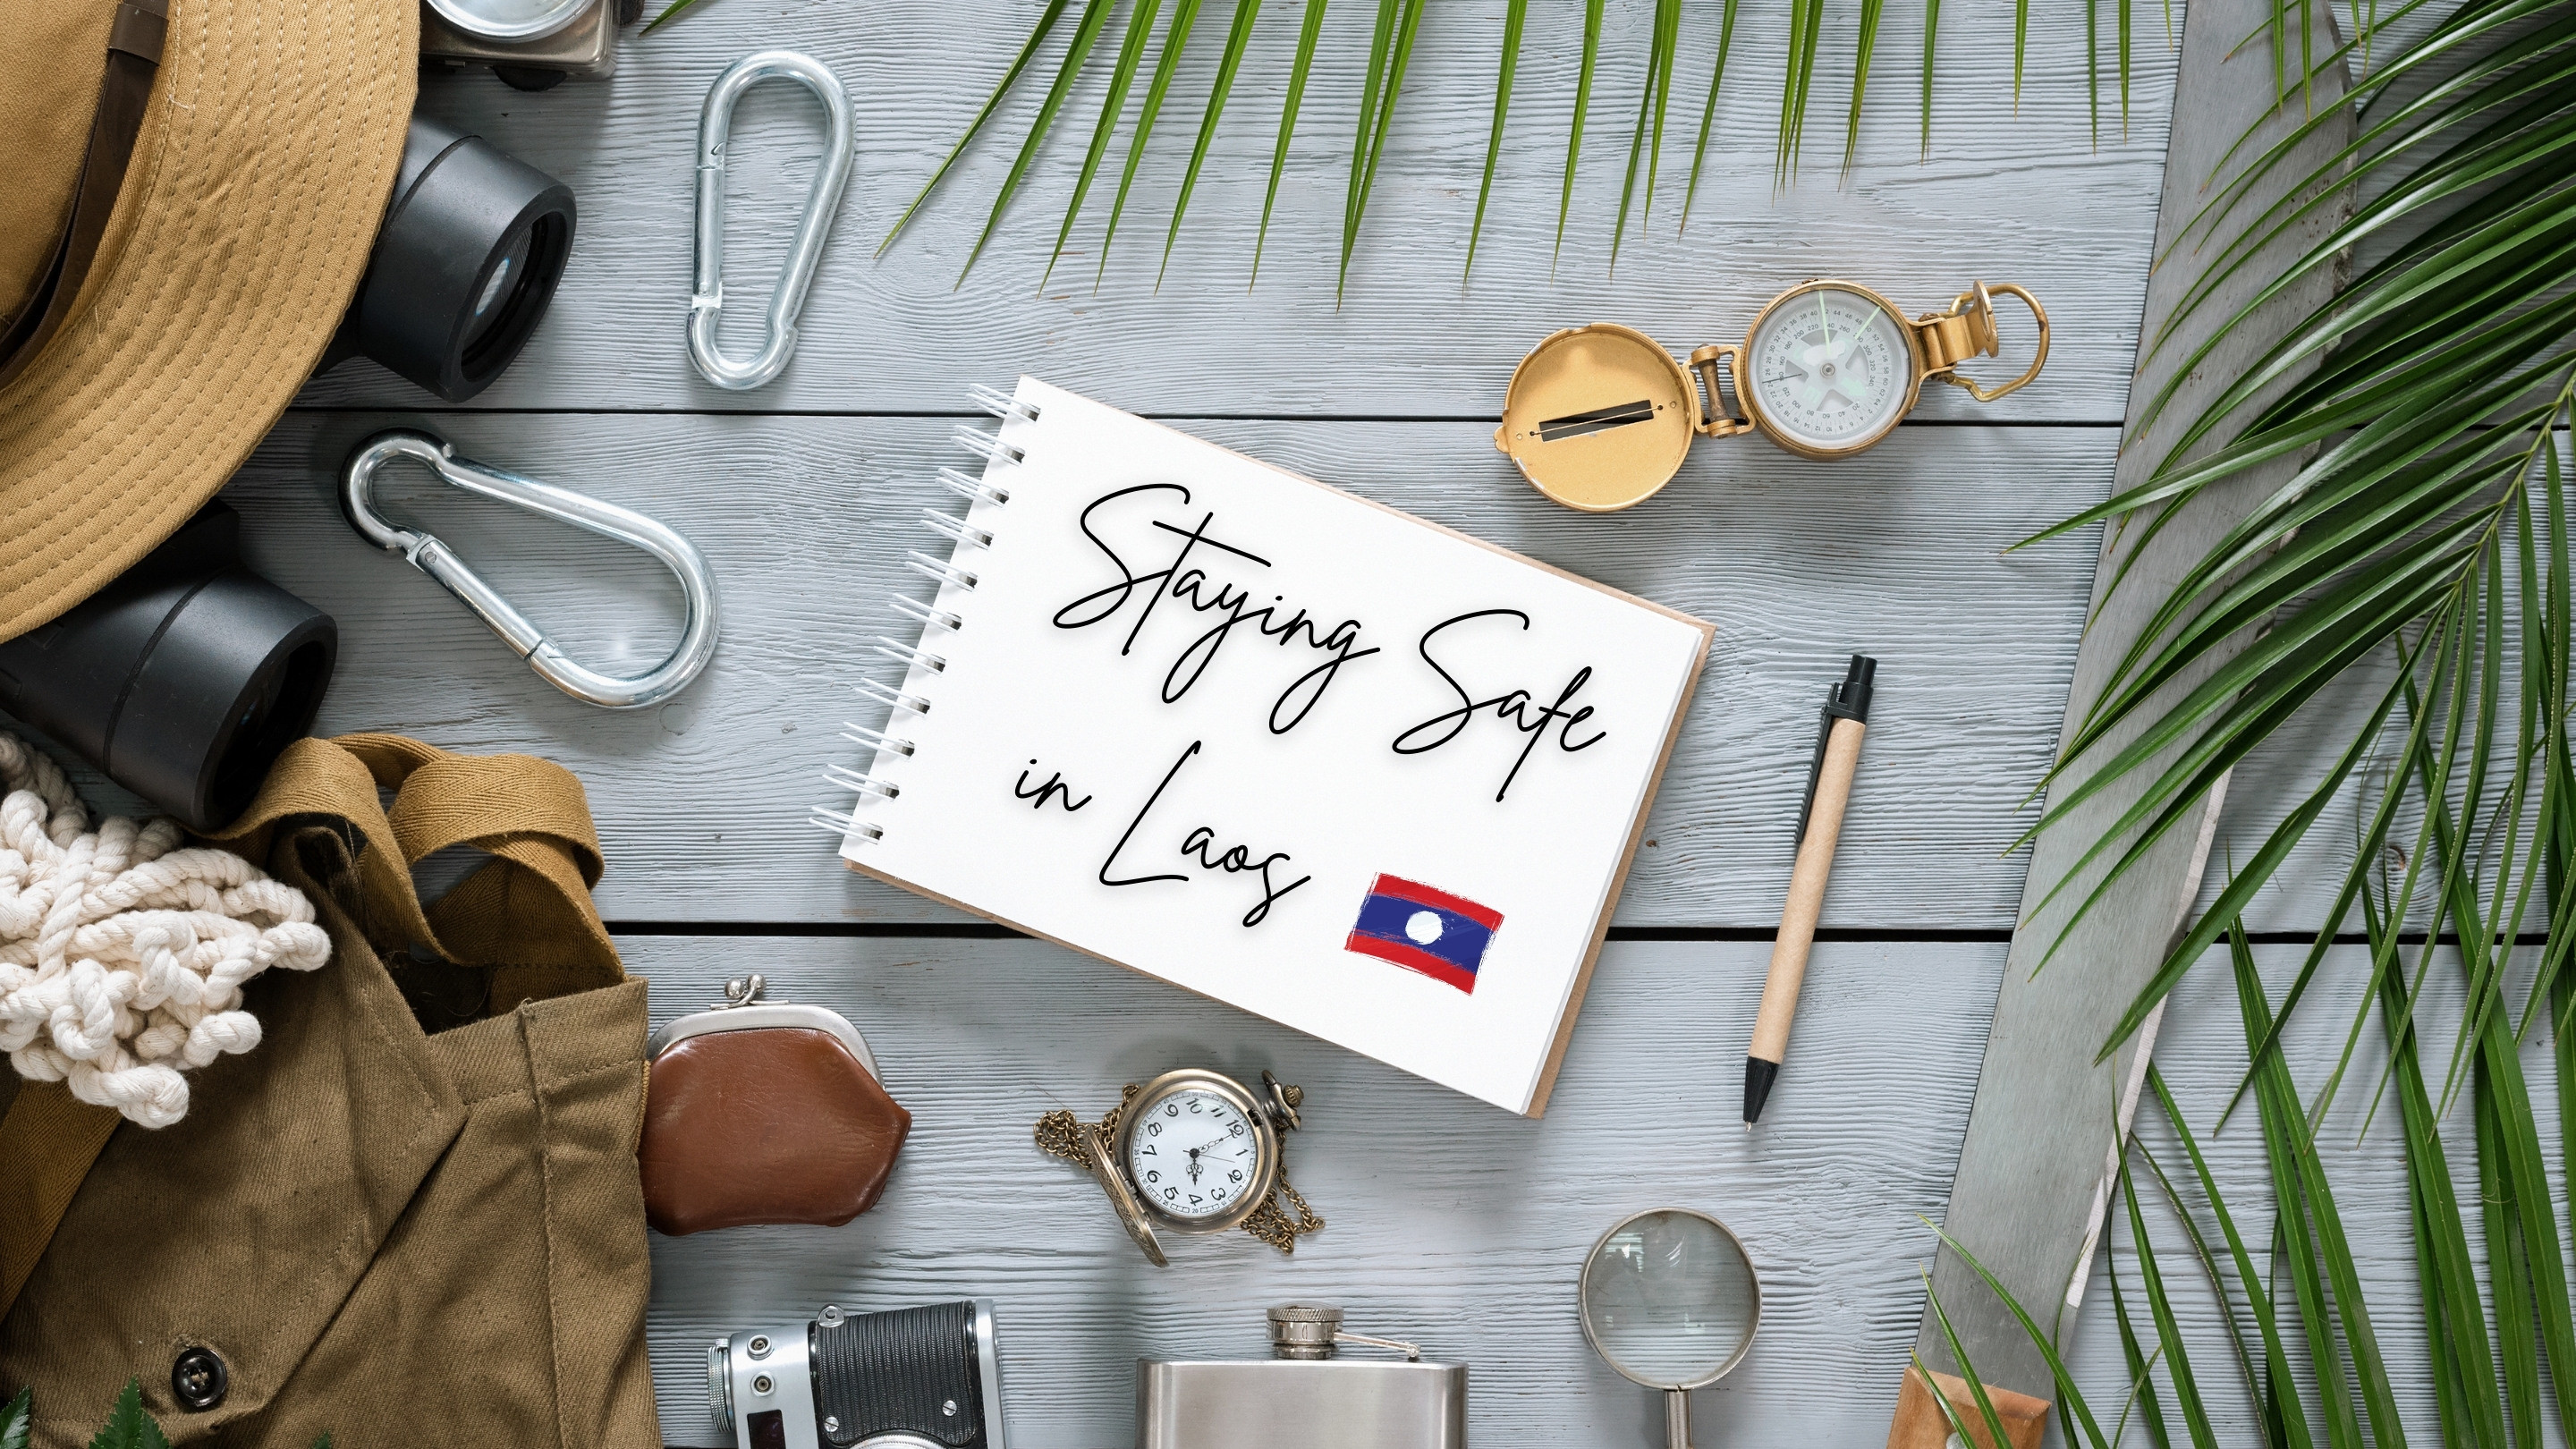 Staying Safe in Laos